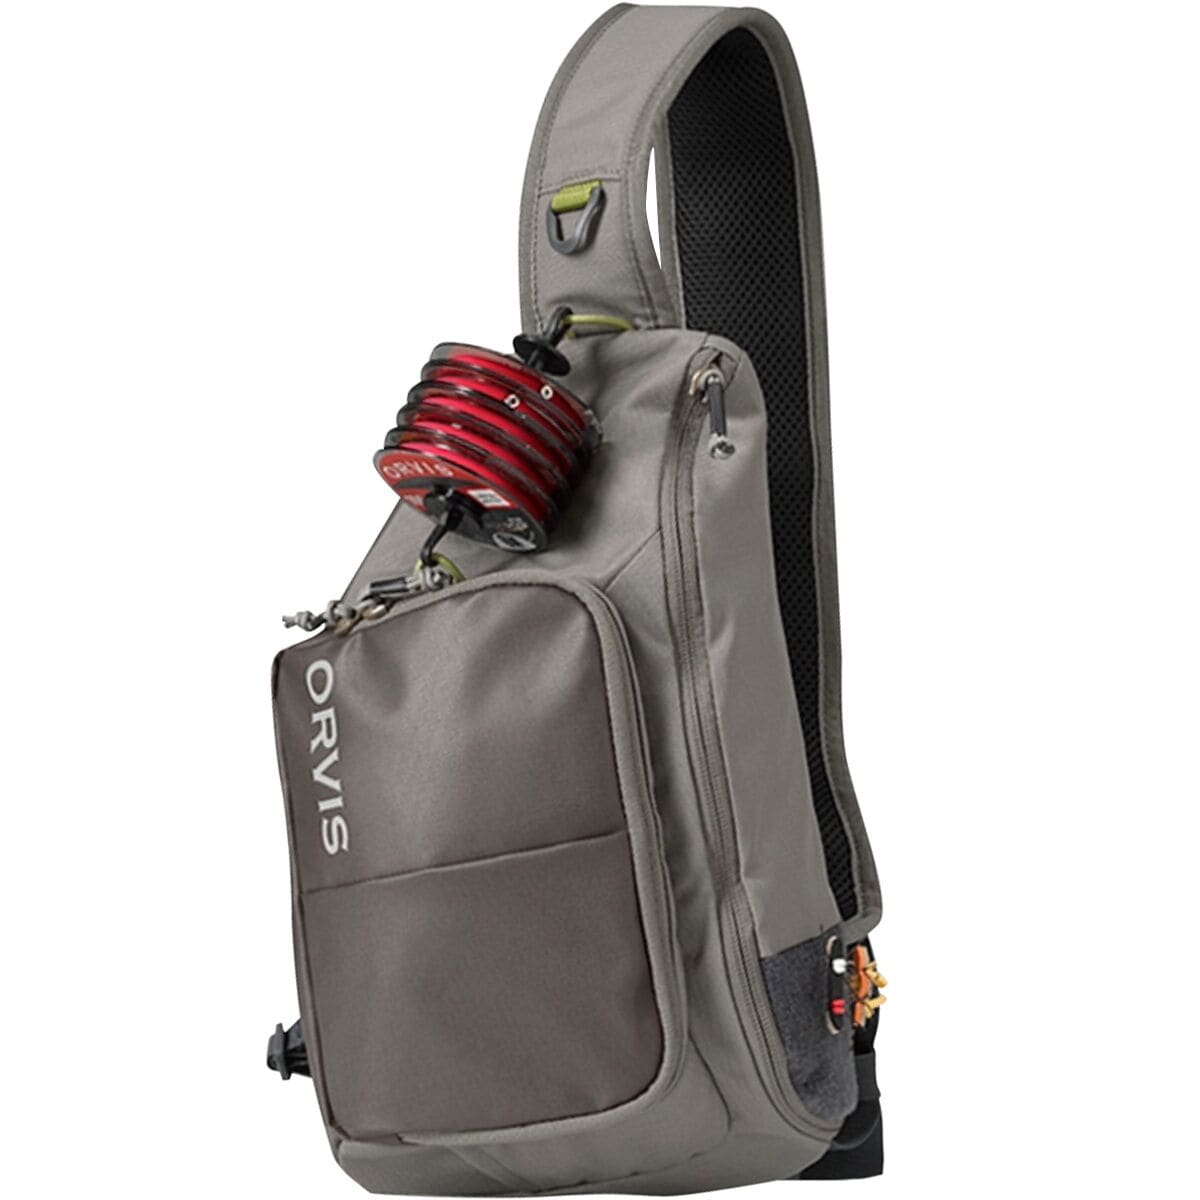 Orvis Fly Fishing Bags & Luggage